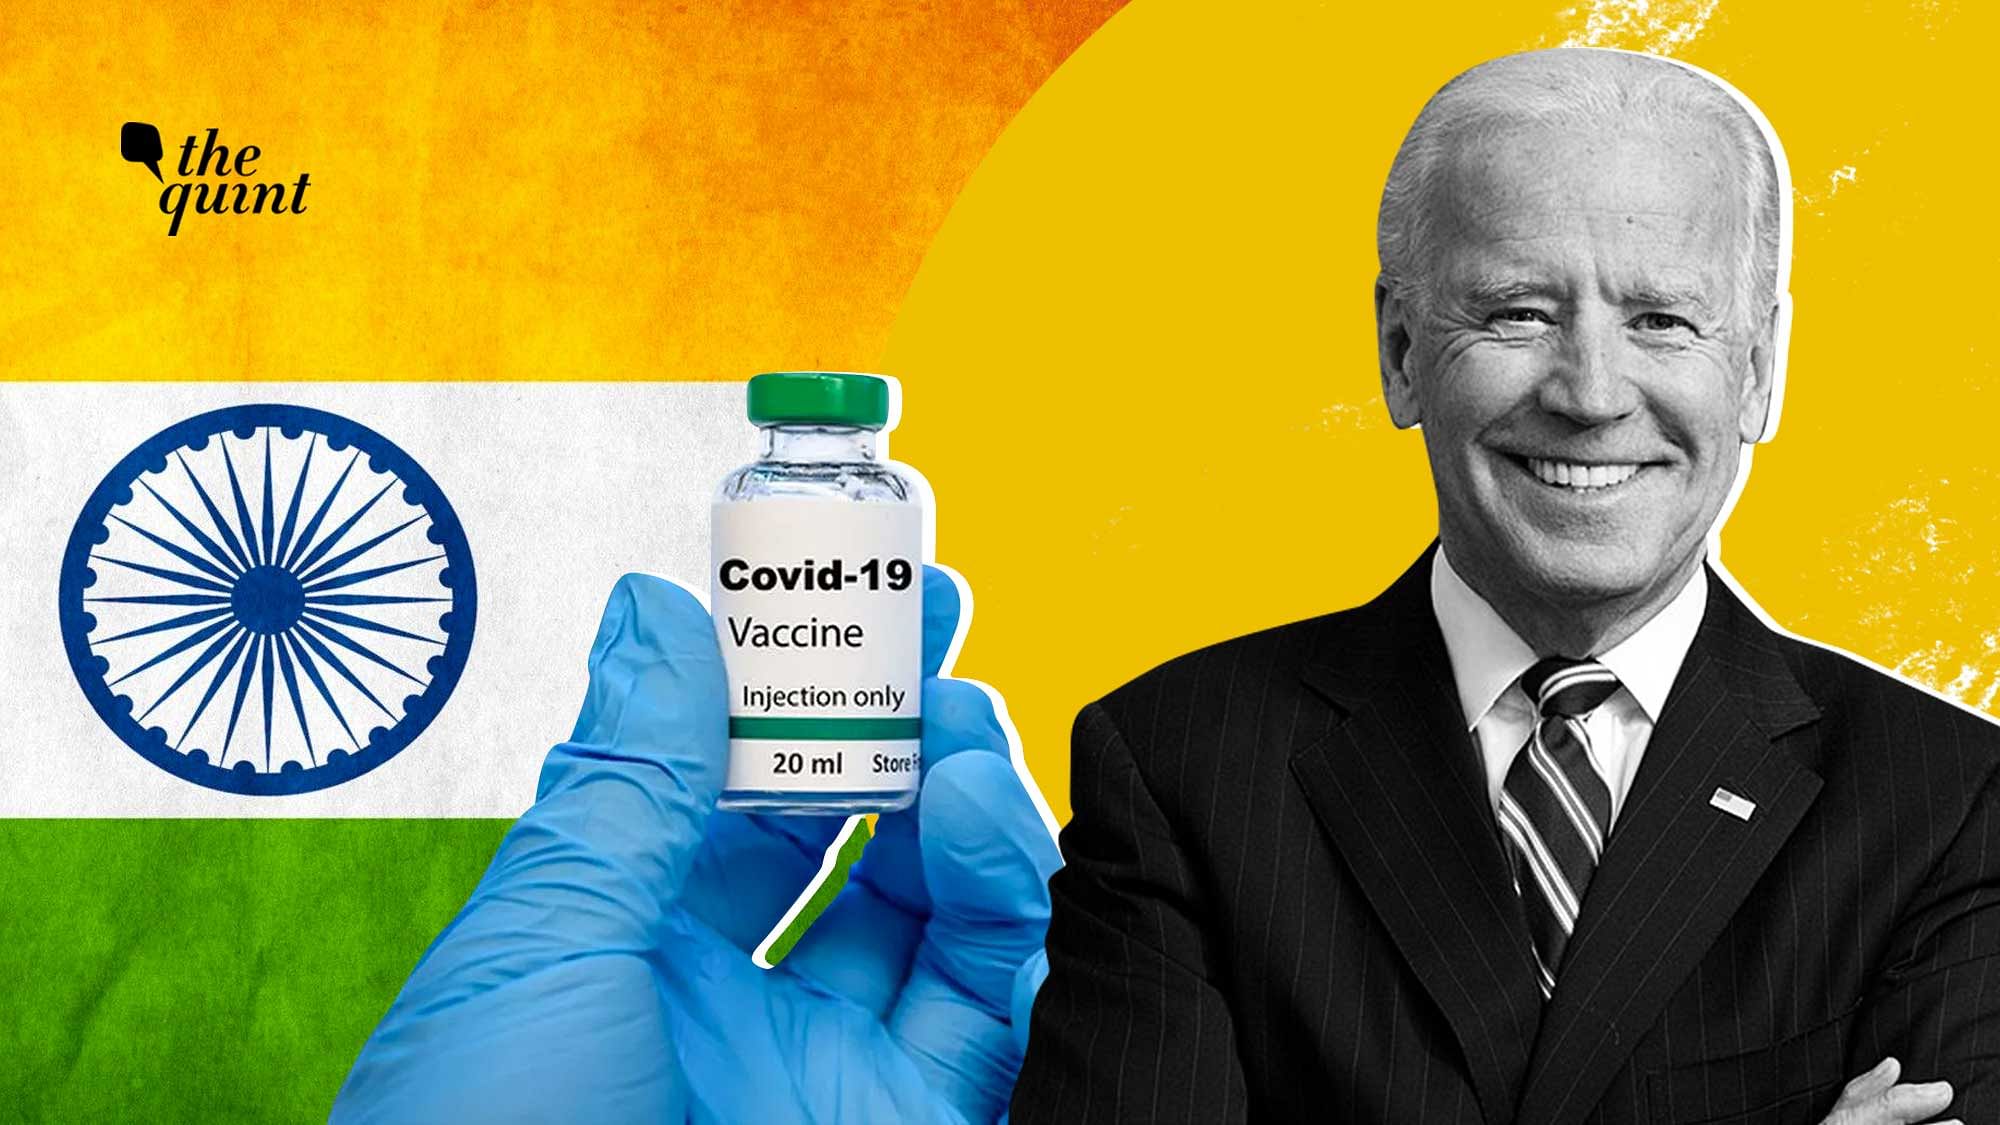 The United States is delivering supplies worth over USD 100 million to help India combat the second wave of the pandemic. Image of US President Biden used for representational purposes.